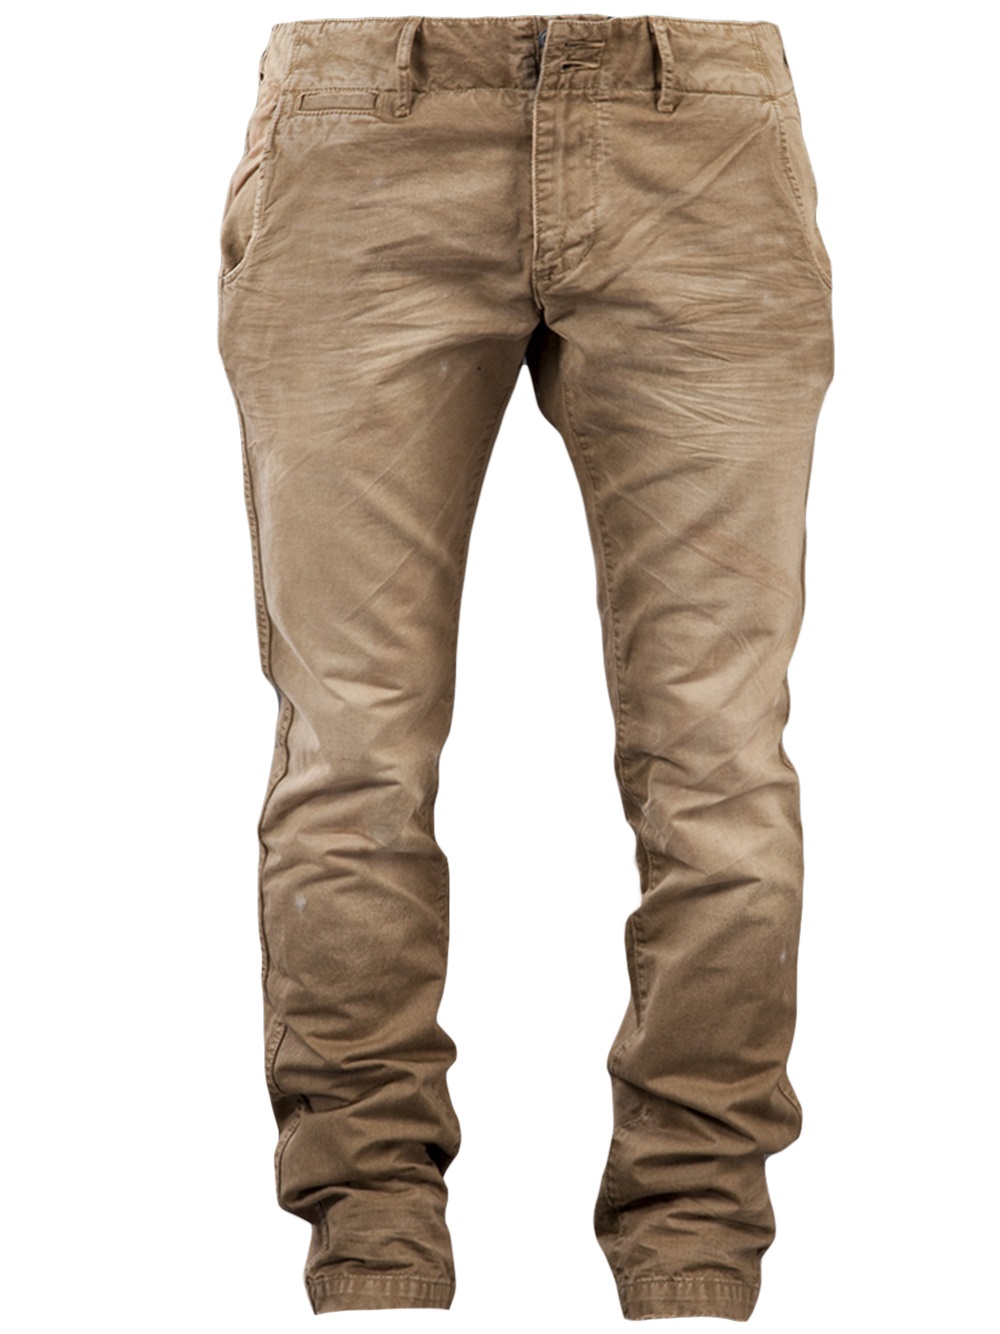 Lyst - Prps Colored Savoy Chino Pant in Brown for Men